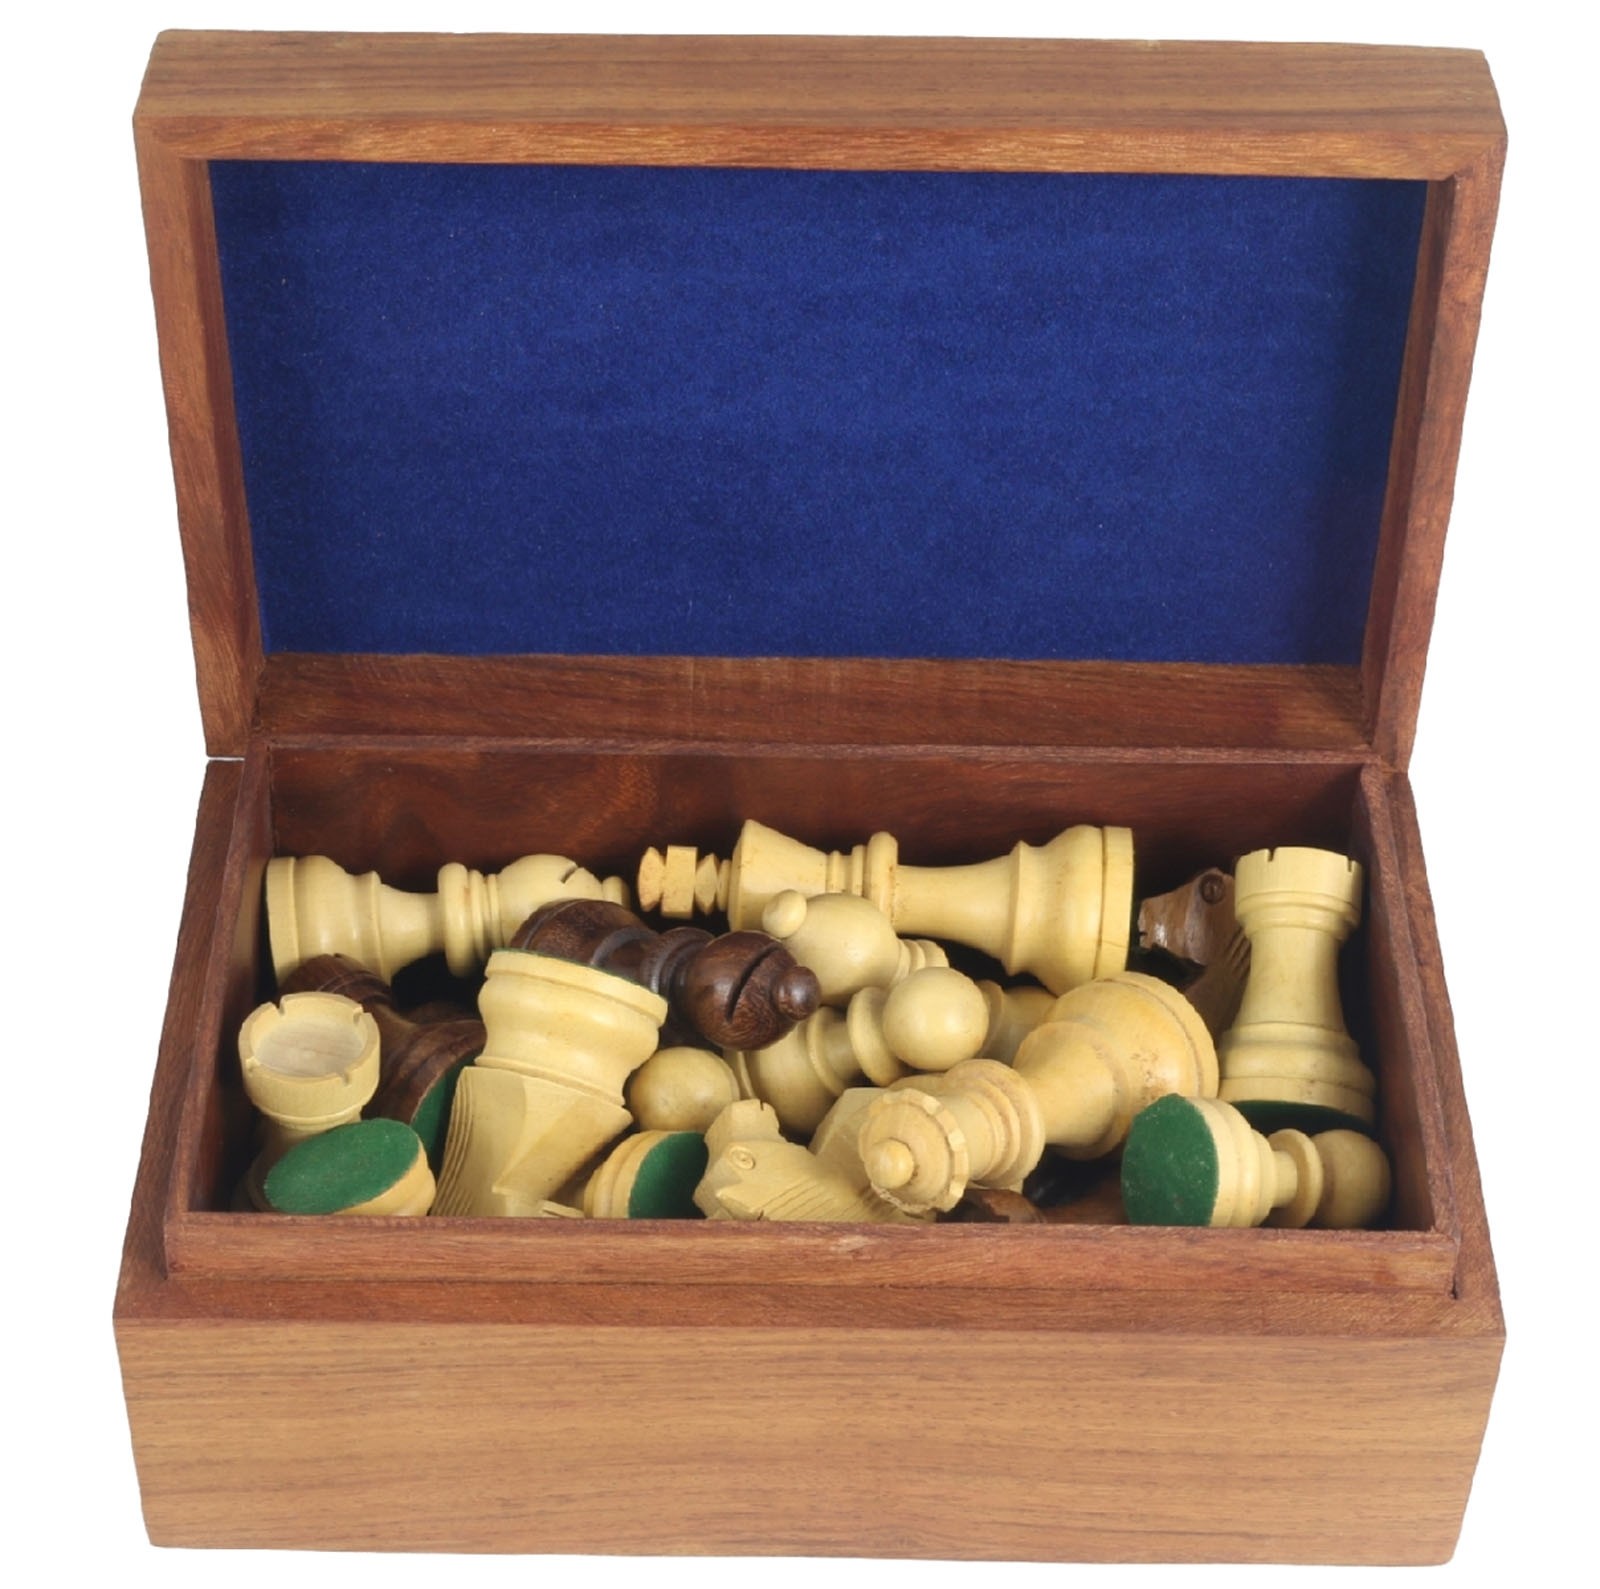 Chess Pieces in Box 20.4cm